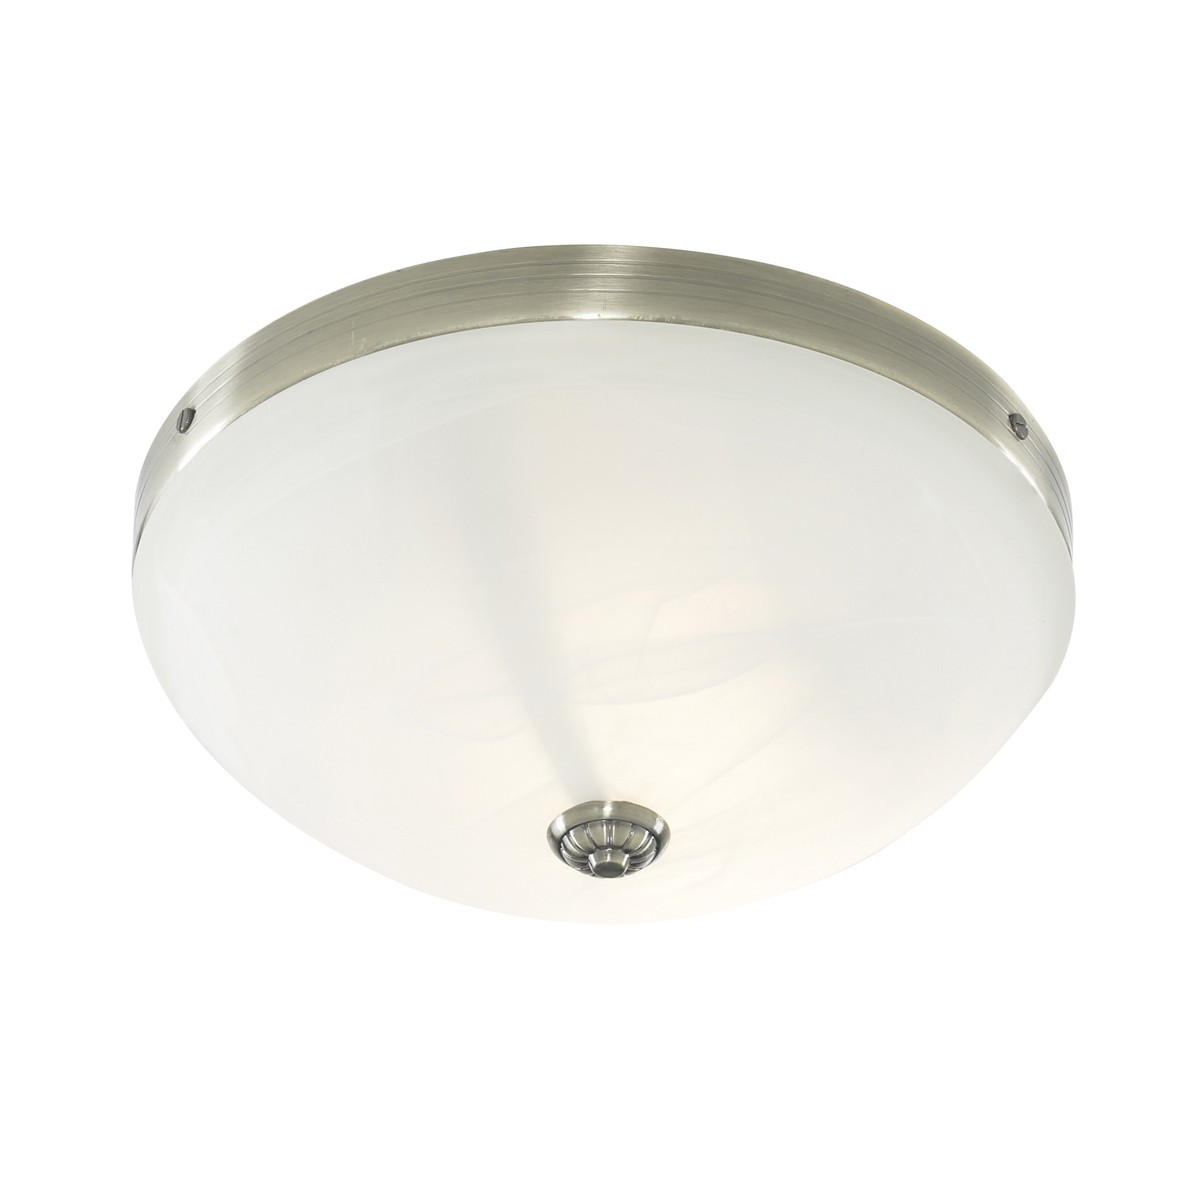 Searchlight 702SS Satin Silver Round Flush Ceiling Light Fixture